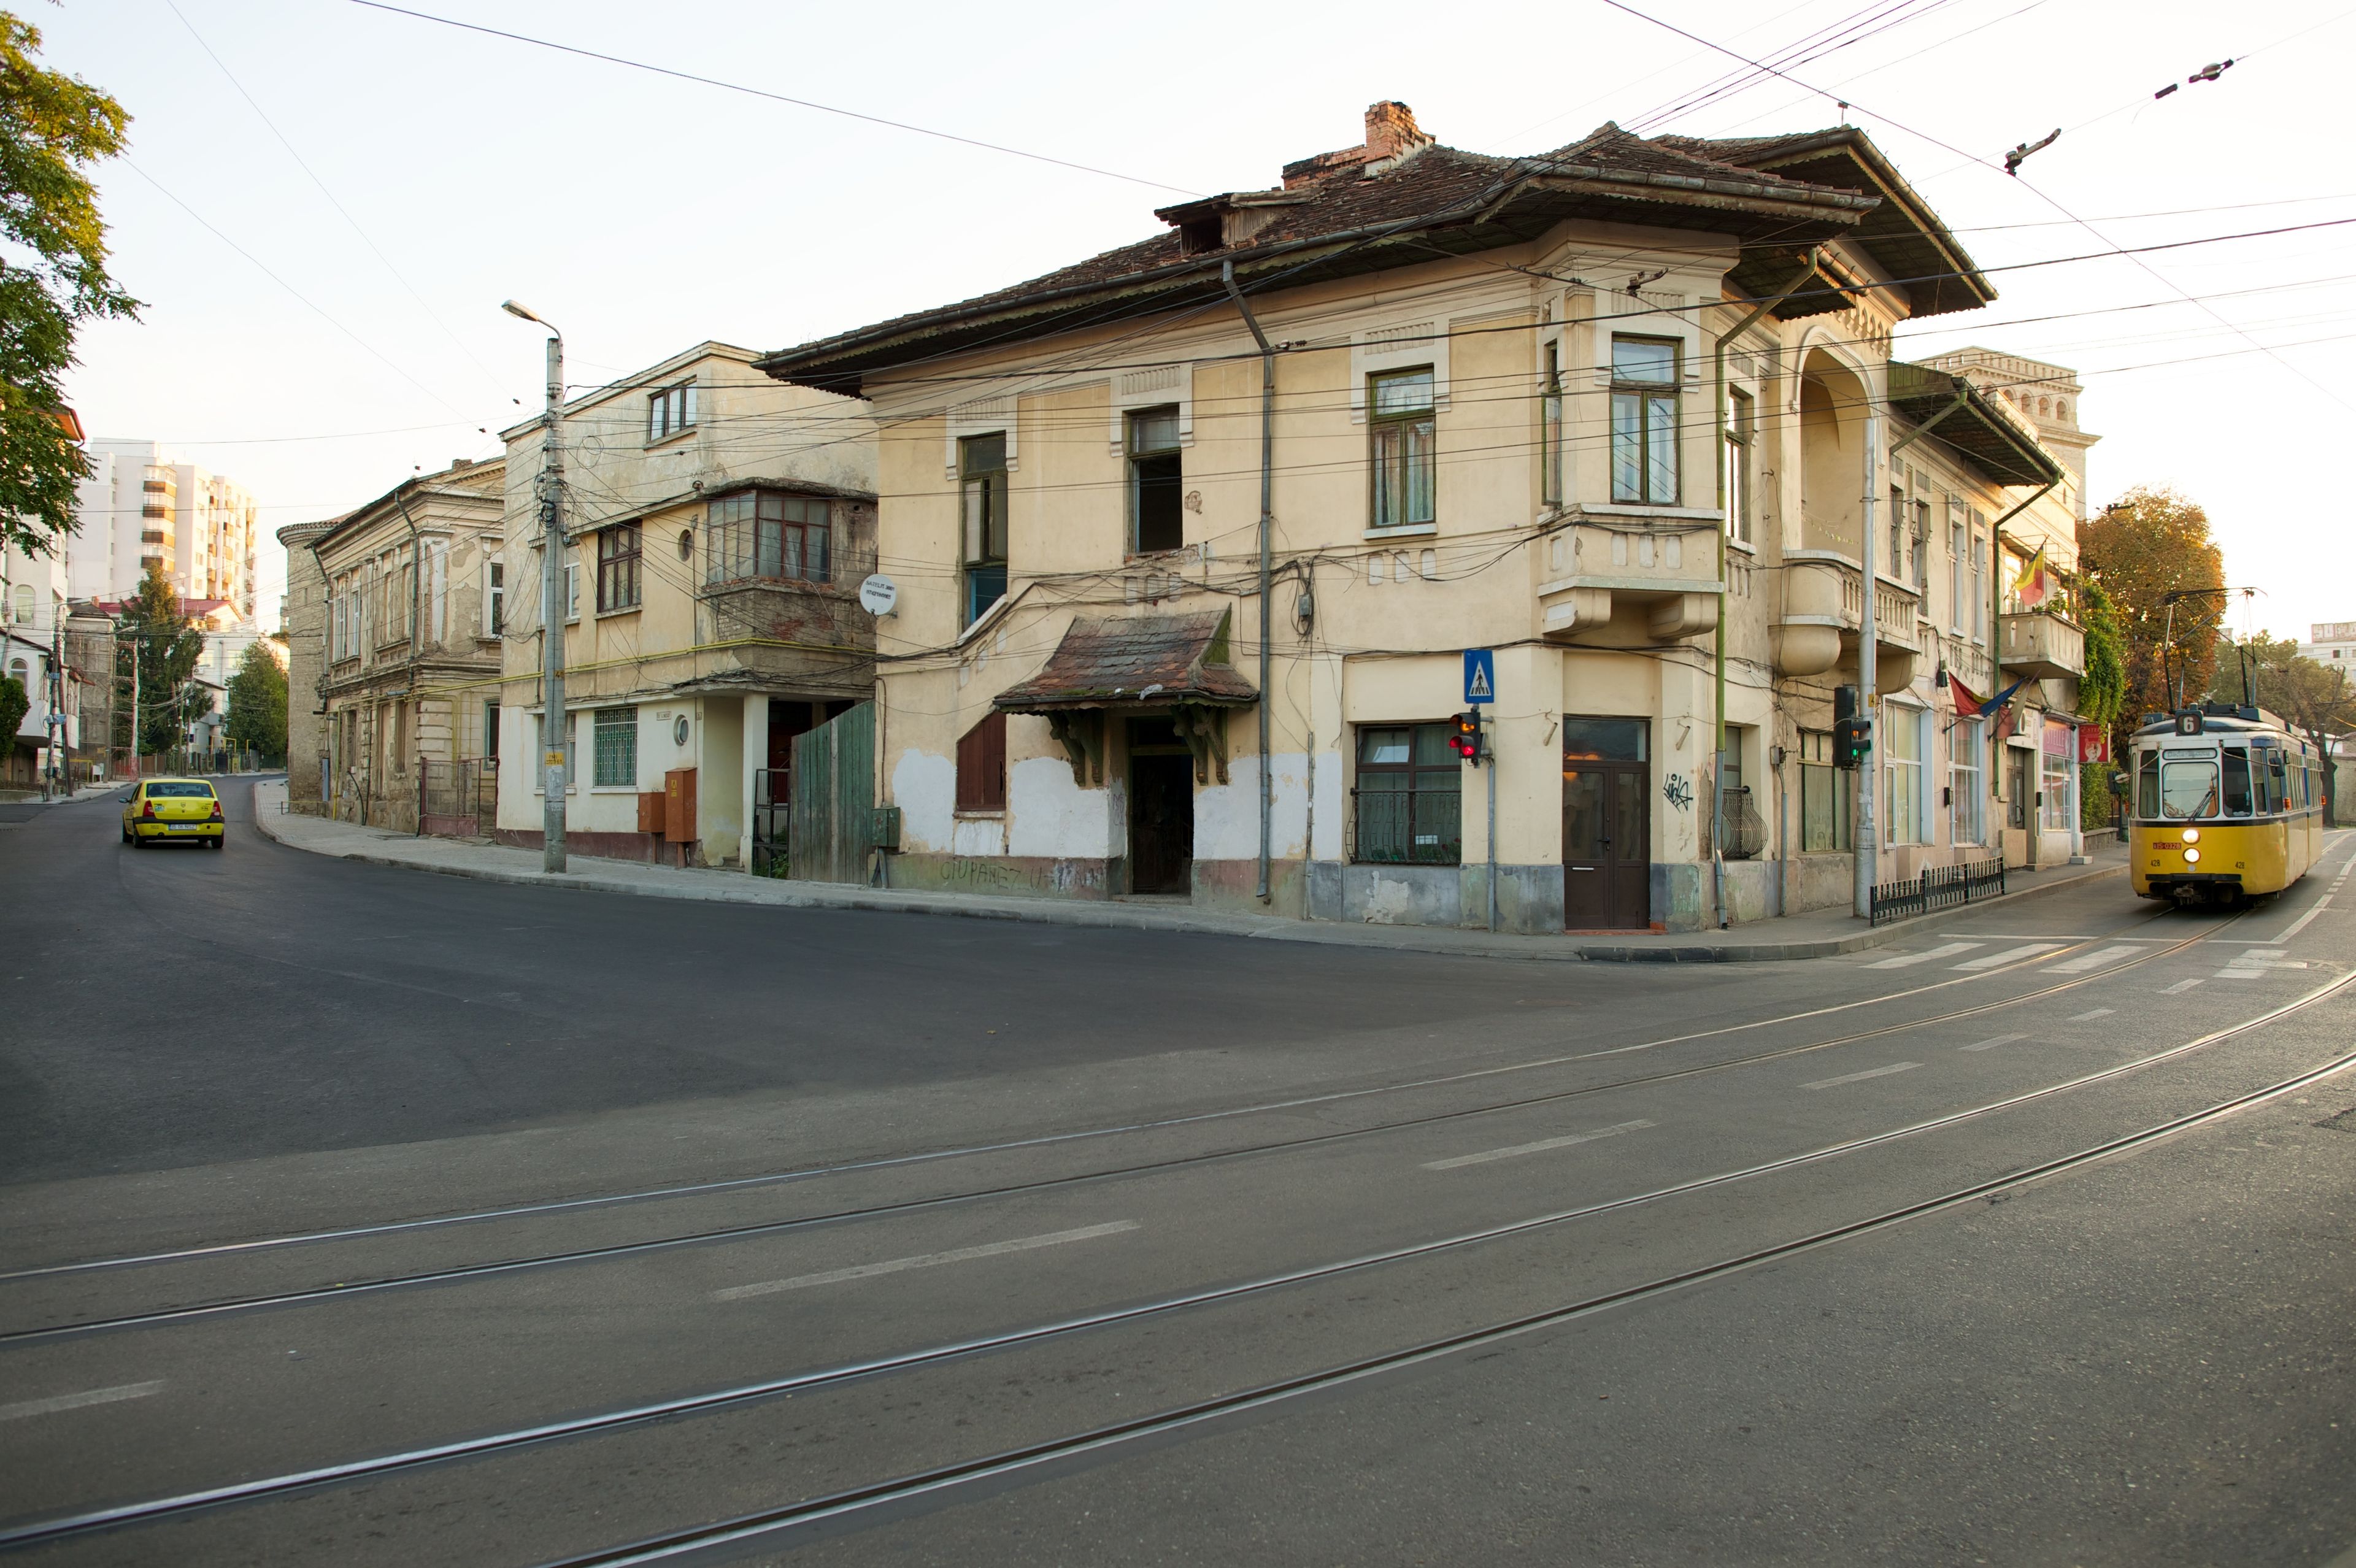 A row of buildings and a yellow and white train on a street in Romania.